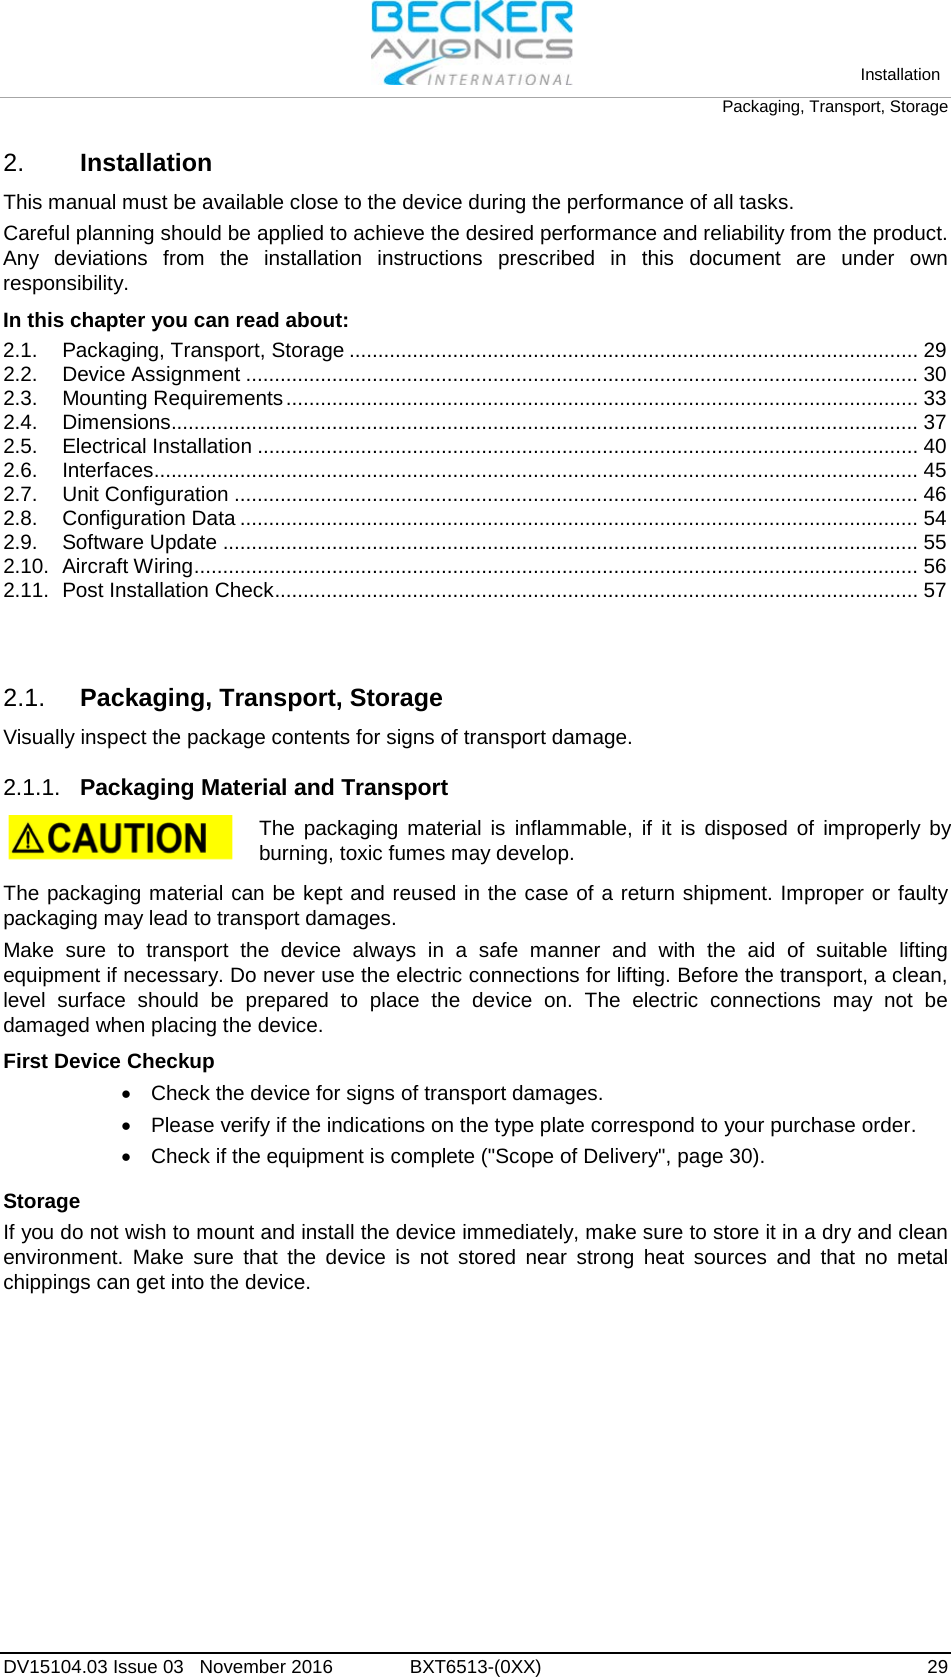   Installation Packaging, Transport, Storage  DV15104.03 Issue 03   November 2016 BXT6513-(0XX)  29 2. Installation This manual must be available close to the device during the performance of all tasks. Careful planning should be applied to achieve the desired performance and reliability from the product. Any deviations from the installation instructions prescribed in this document are under own responsibility. In this chapter you can read about: 2.1. Packaging, Transport, Storage ................................................................................................... 29 2.2. Device Assignment ..................................................................................................................... 30 2.3. Mounting Requirements .............................................................................................................. 33 2.4. Dimensions.................................................................................................................................. 37 2.5. Electrical Installation ................................................................................................................... 40 2.6. Interfaces..................................................................................................................................... 45 2.7. Unit Configuration ....................................................................................................................... 46 2.8. Configuration Data ...................................................................................................................... 54 2.9. Software Update ......................................................................................................................... 55 2.10. Aircraft Wiring .............................................................................................................................. 56 2.11. Post Installation Check ................................................................................................................ 57   2.1. Packaging, Transport, Storage Visually inspect the package contents for signs of transport damage.  2.1.1. Packaging Material and Transport   The packaging material is inflammable, if it is disposed of improperly by burning, toxic fumes may develop.  The packaging material can be kept and reused in the case of a return shipment. Improper or faulty packaging may lead to transport damages. Make sure to transport the device always in a safe manner and with the aid of suitable lifting equipment if necessary. Do never use the electric connections for lifting. Before the transport, a clean, level surface should be prepared to place the device on. The electric connections may not be damaged when placing the device. First Device Checkup • Check the device for signs of transport damages. • Please verify if the indications on the type plate correspond to your purchase order. • Check if the equipment is complete (&quot;Scope of Delivery&quot;, page 30).  Storage If you do not wish to mount and install the device immediately, make sure to store it in a dry and clean environment. Make sure that the device is not stored near strong heat sources and that no metal chippings can get into the device.  